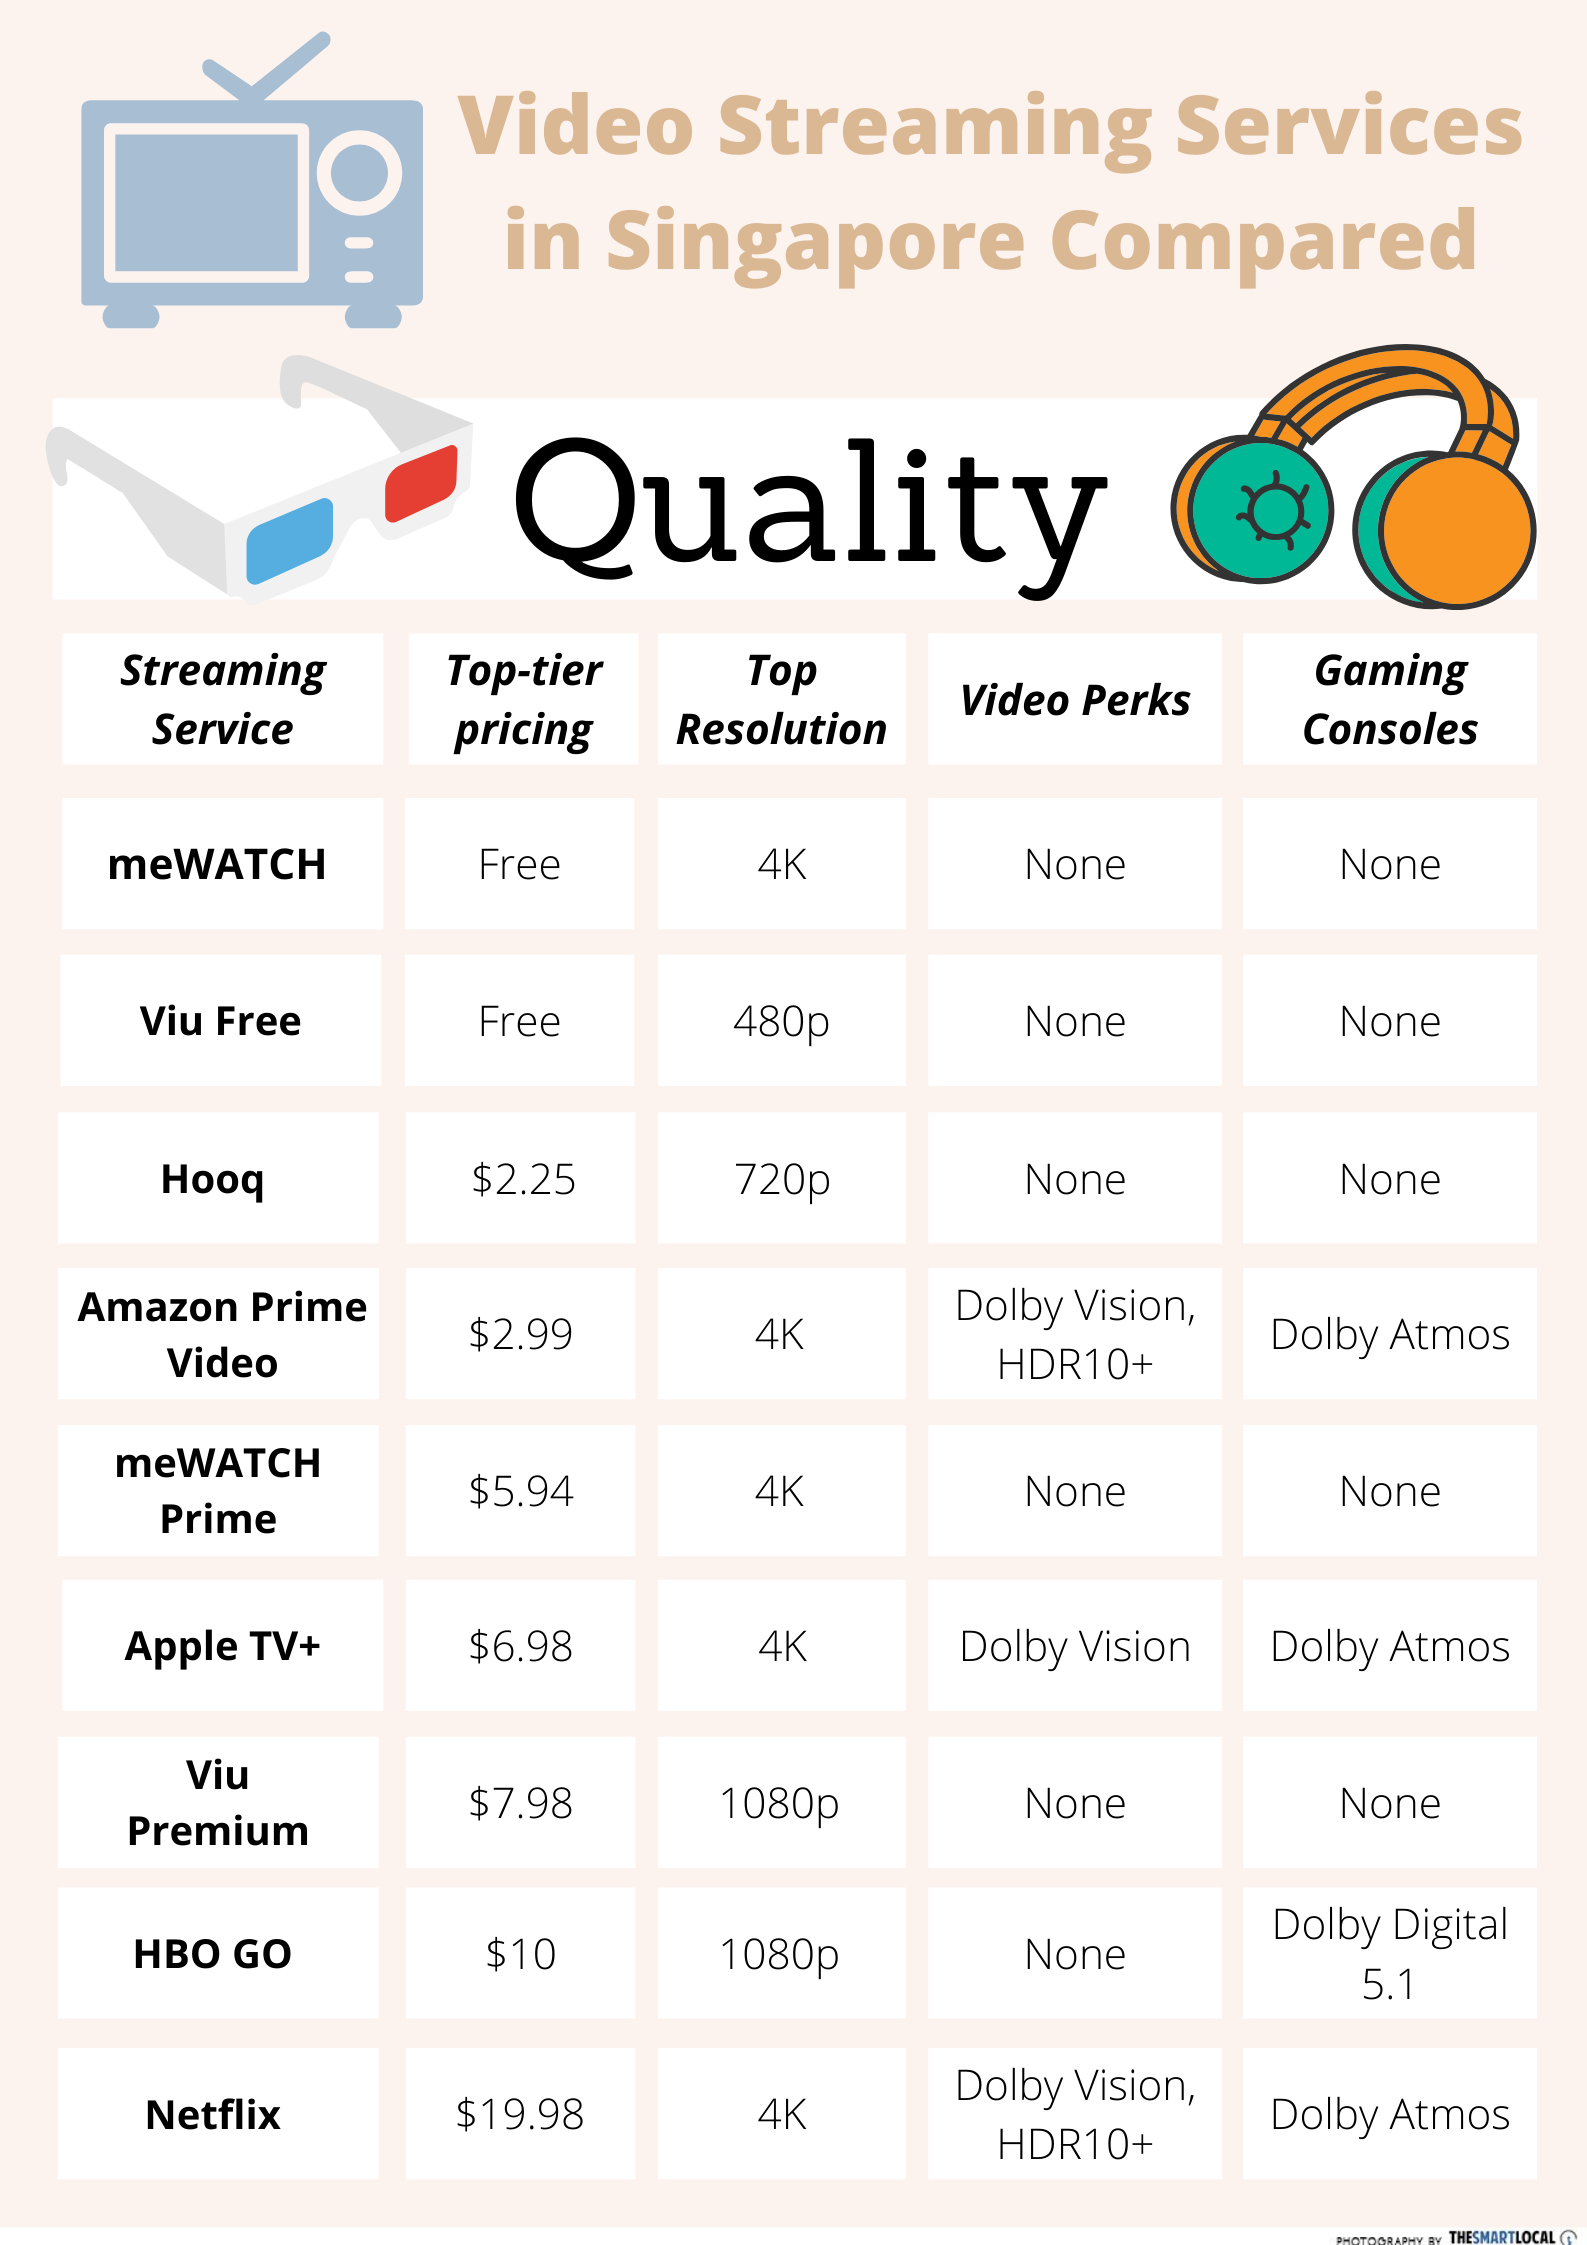 The video and audio quality of the video streaming services available in Singapore.